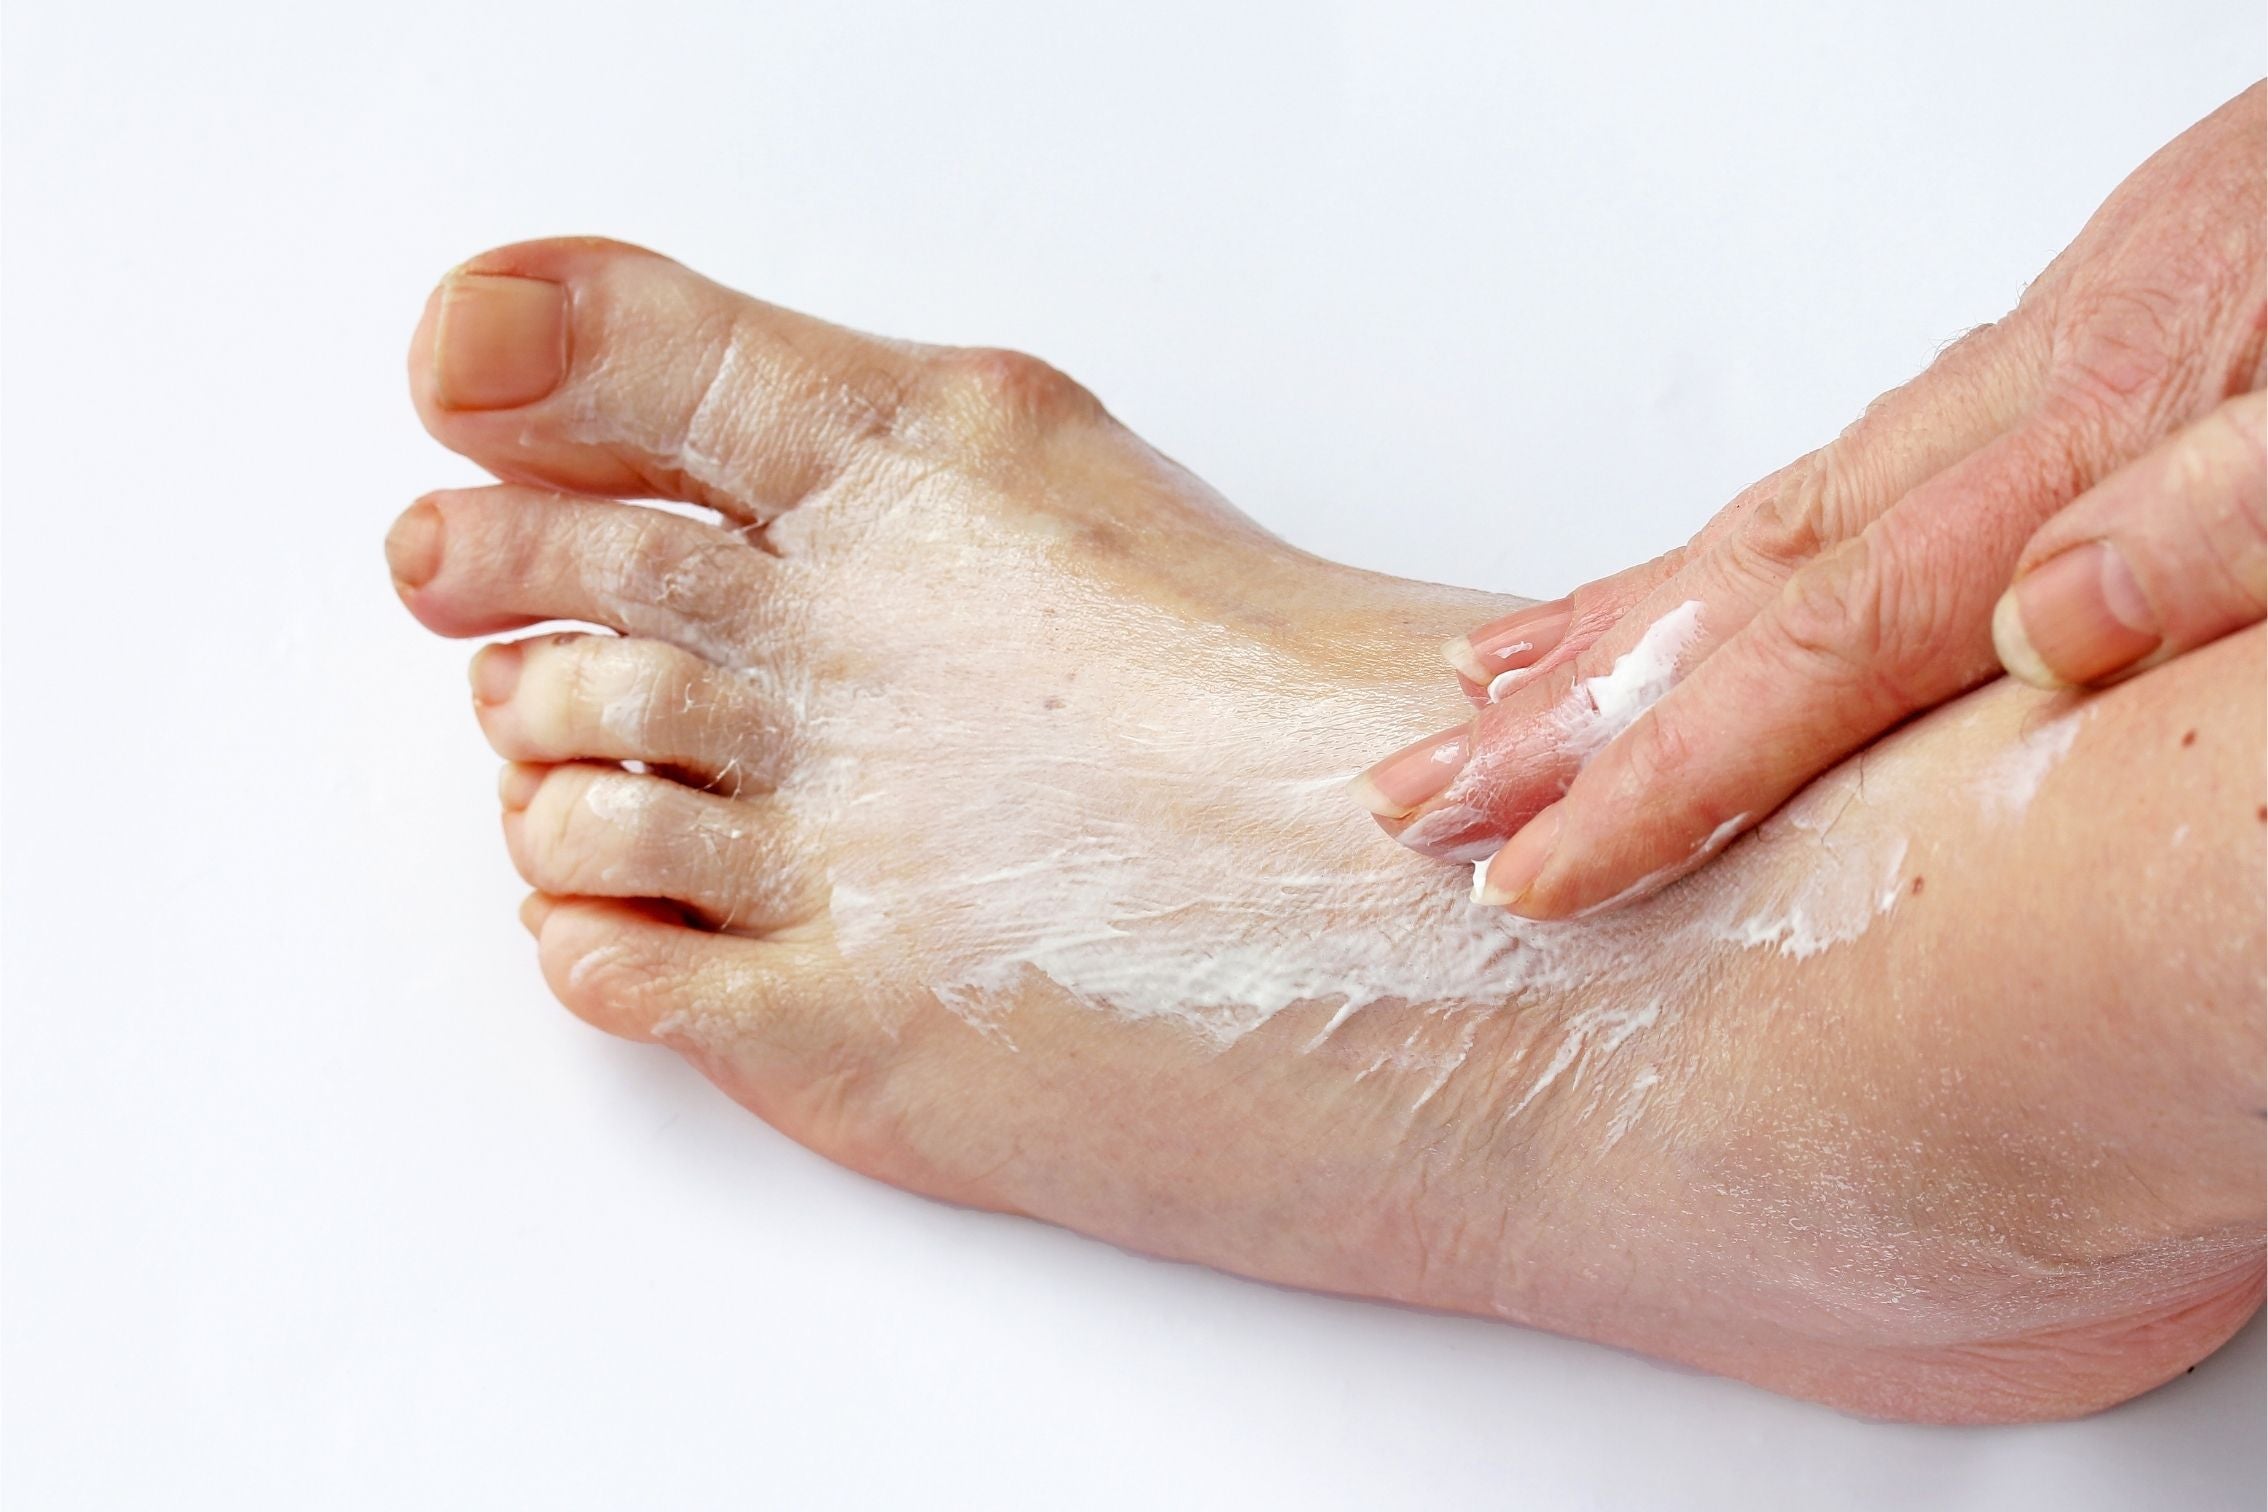 foot cream being applied